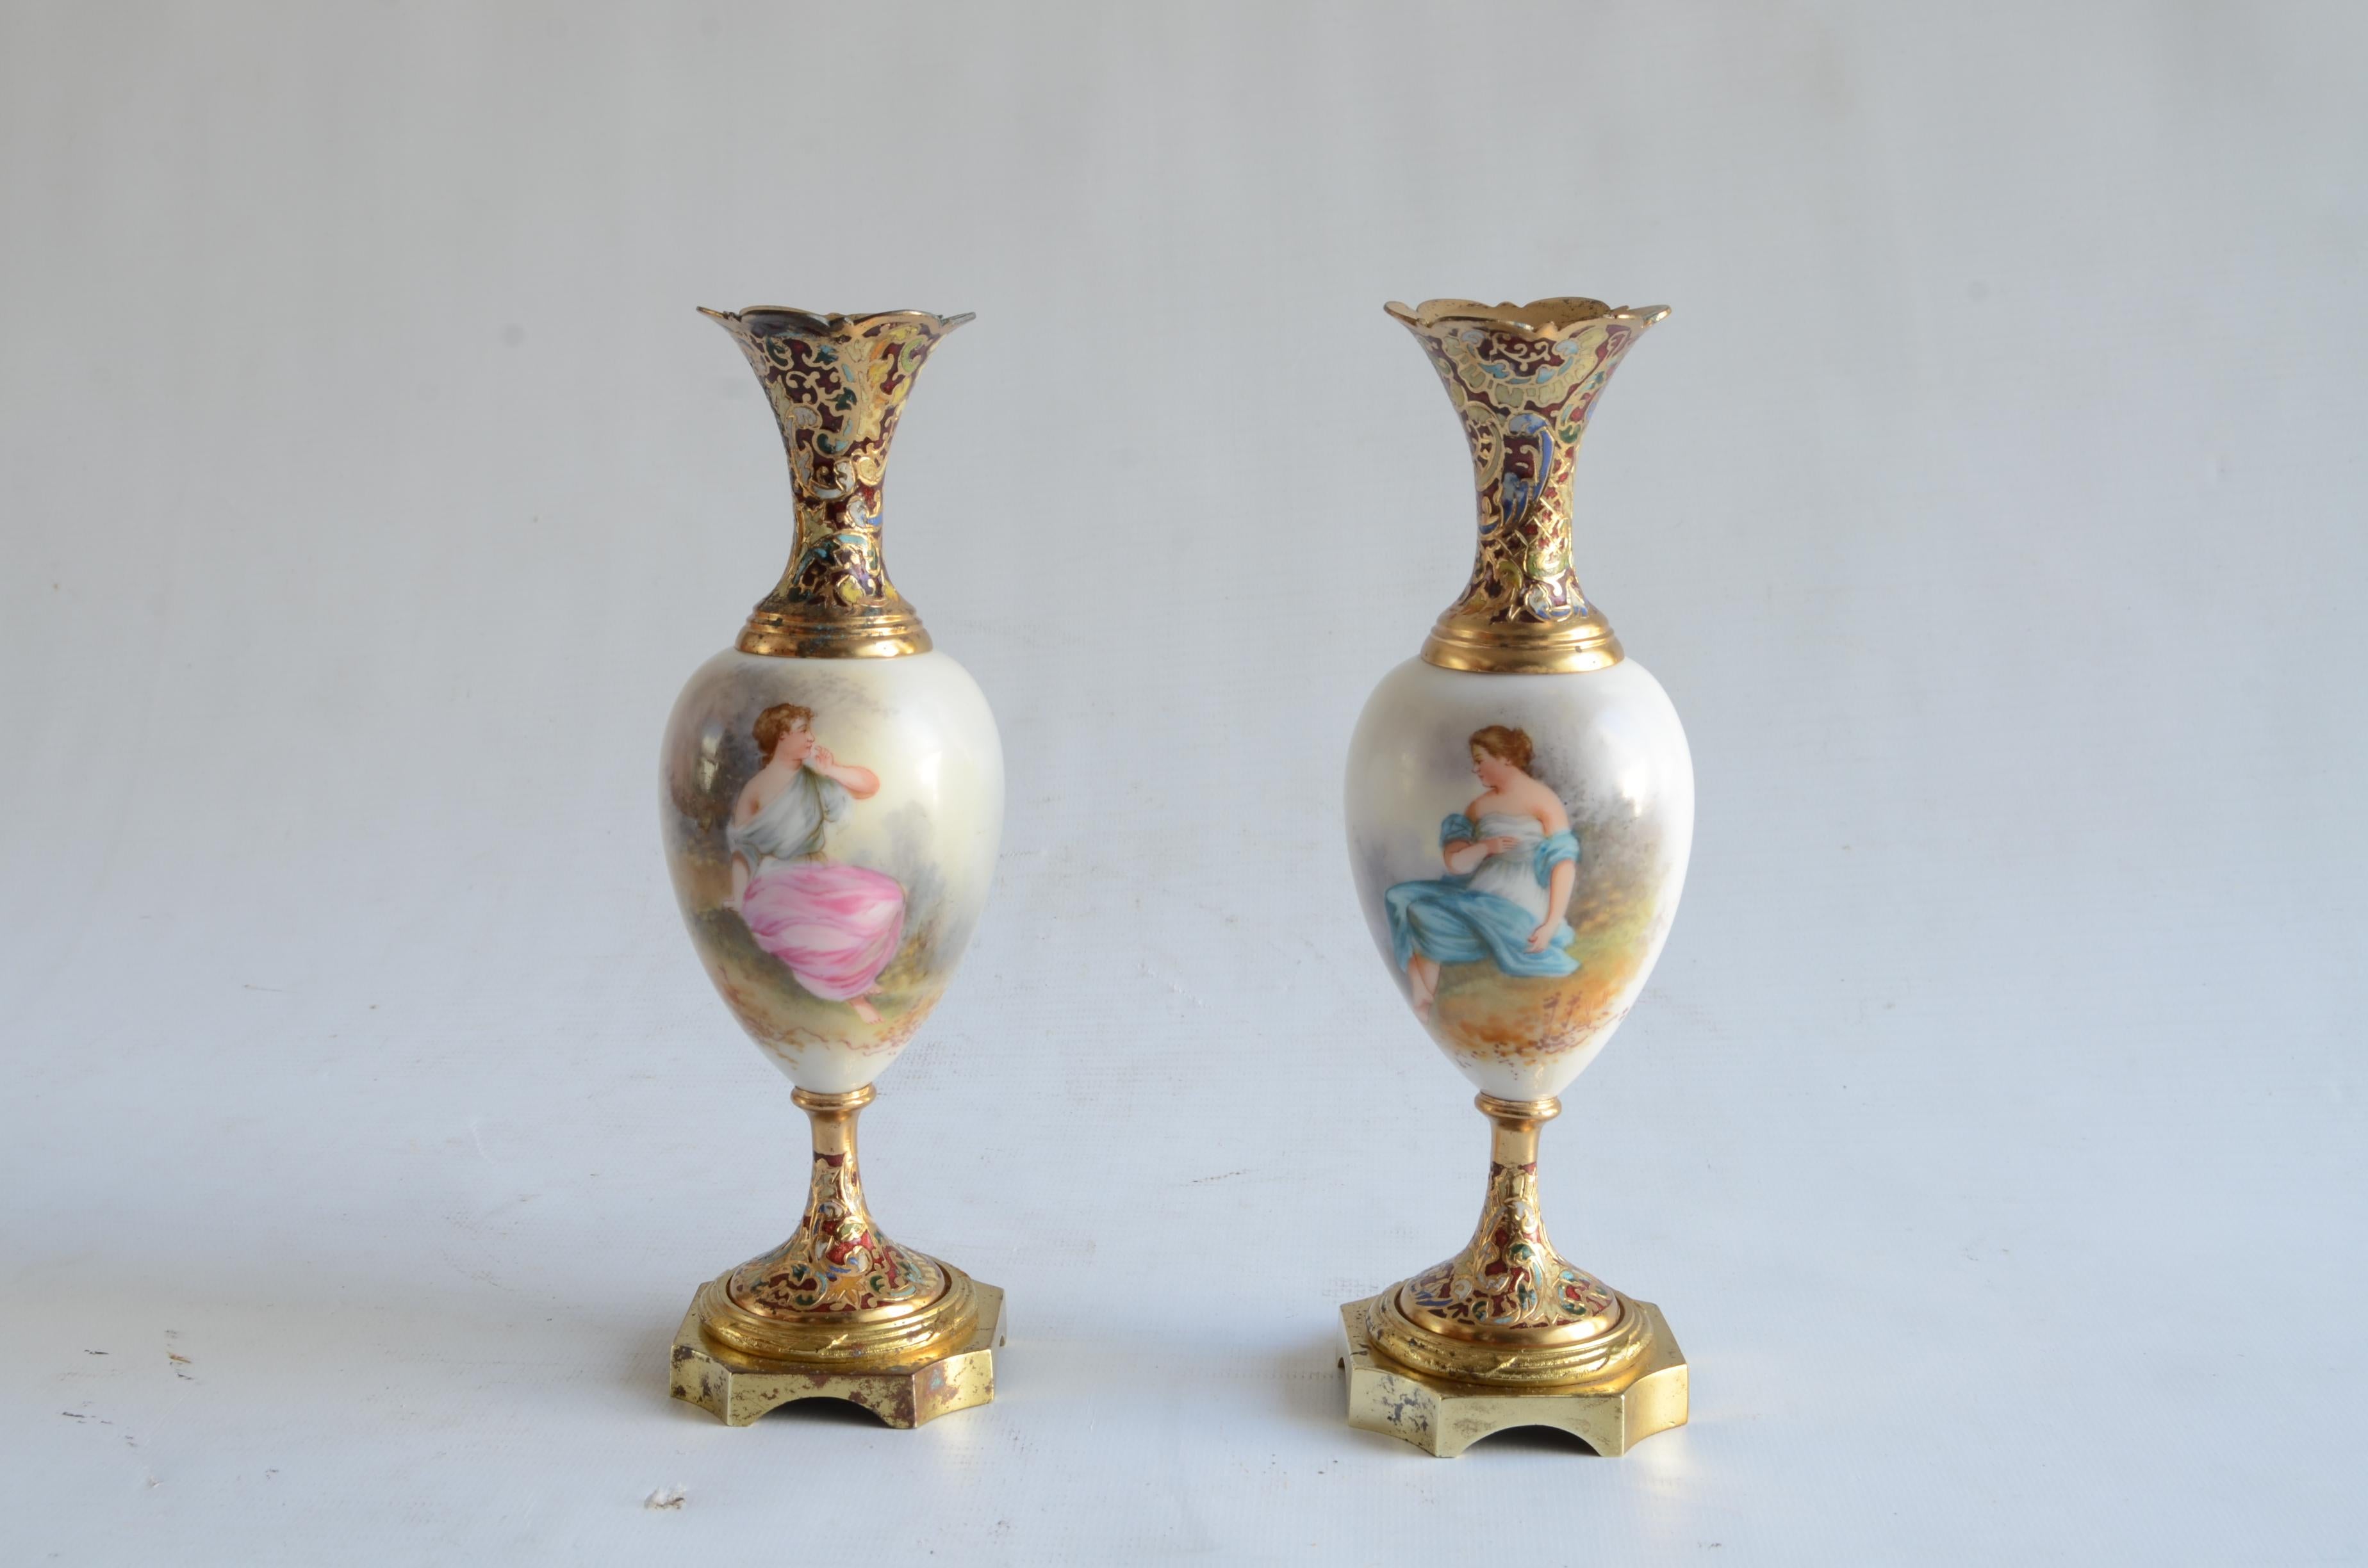 A pair of amphorae Sevres
hand-painted porcelain with champlevé glaze
Origin France
perfect condition.
The Manufacture nationale de Sèvres is one of the most important and well-known European madame-de-pompadour porcelain factories in Europe. It is